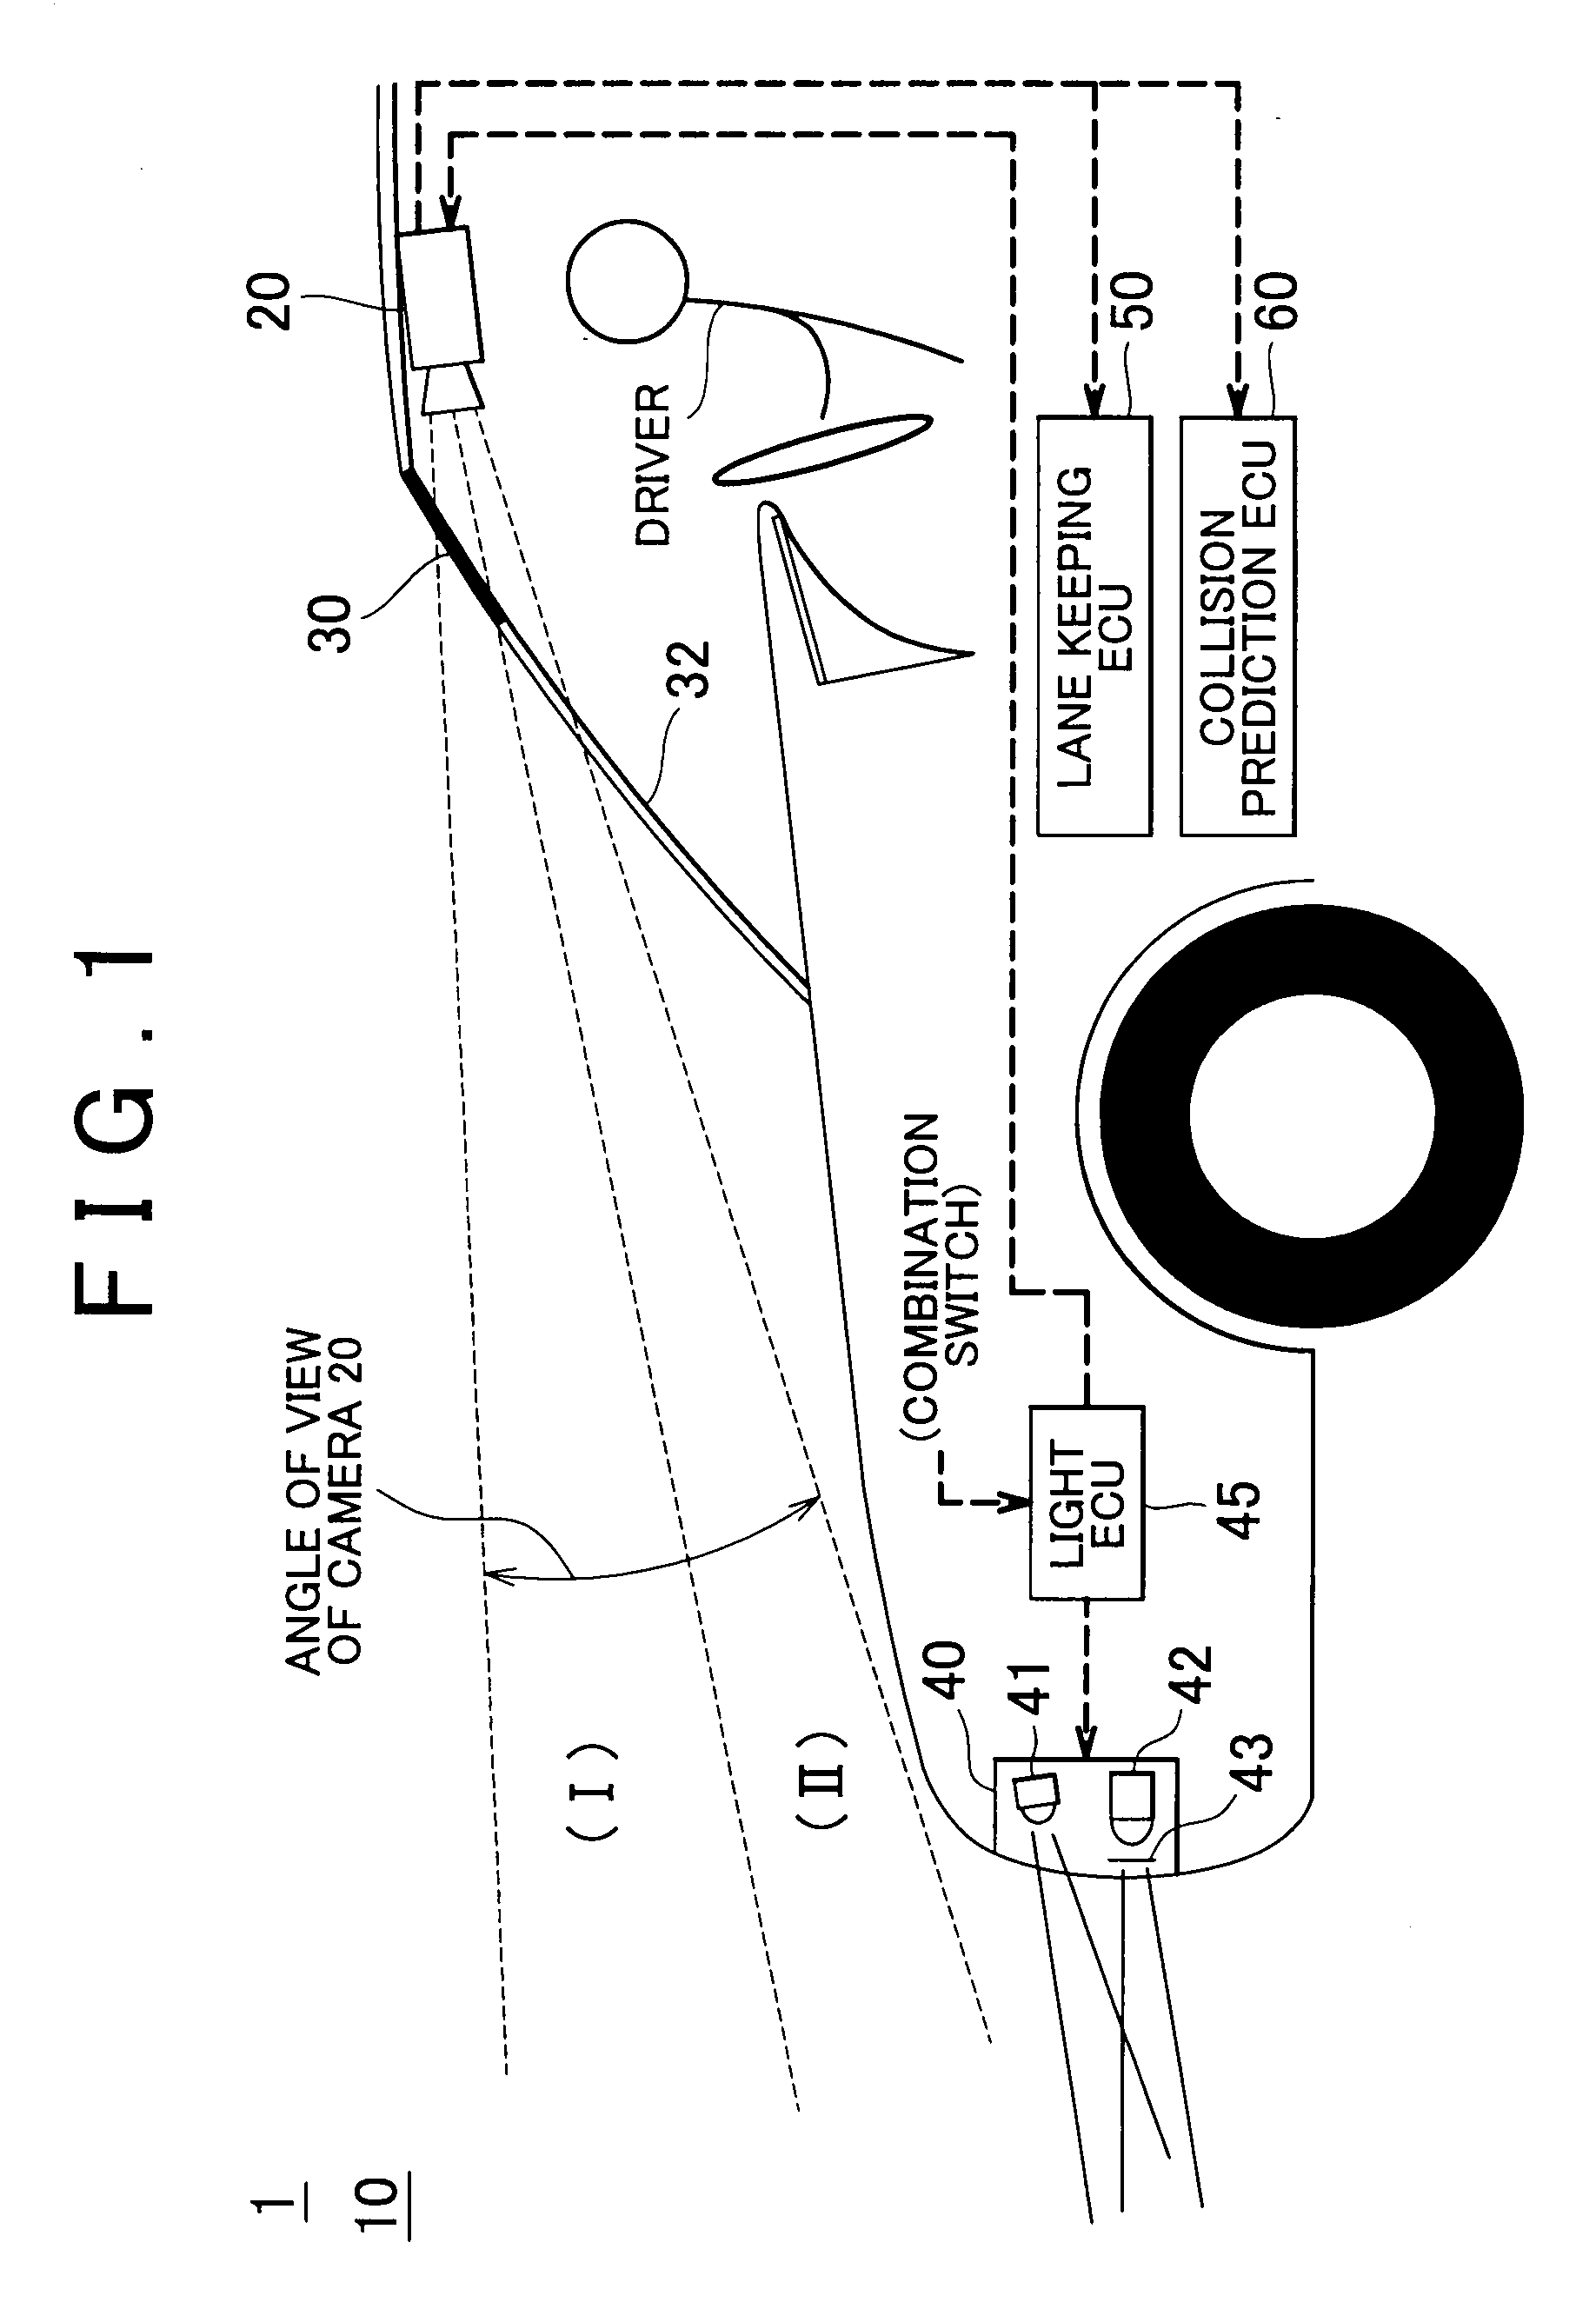 Vehicle imaging system and vehicle control apparatus